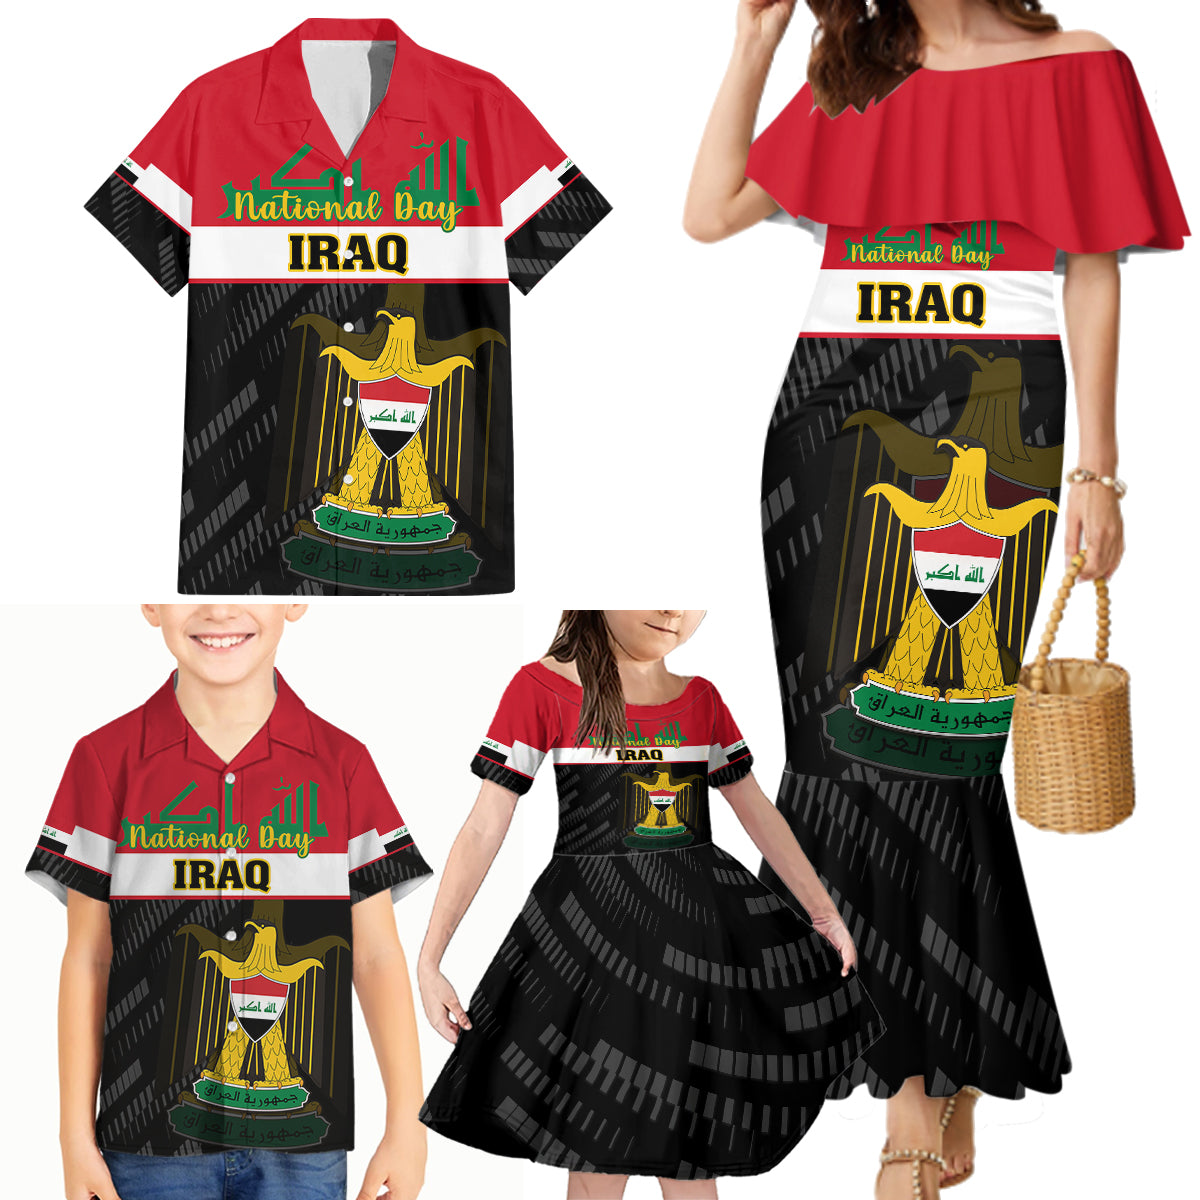 iraq-national-day-family-matching-mermaid-dress-and-hawaiian-shirt-iraqi-coat-of-arms-with-flag-style